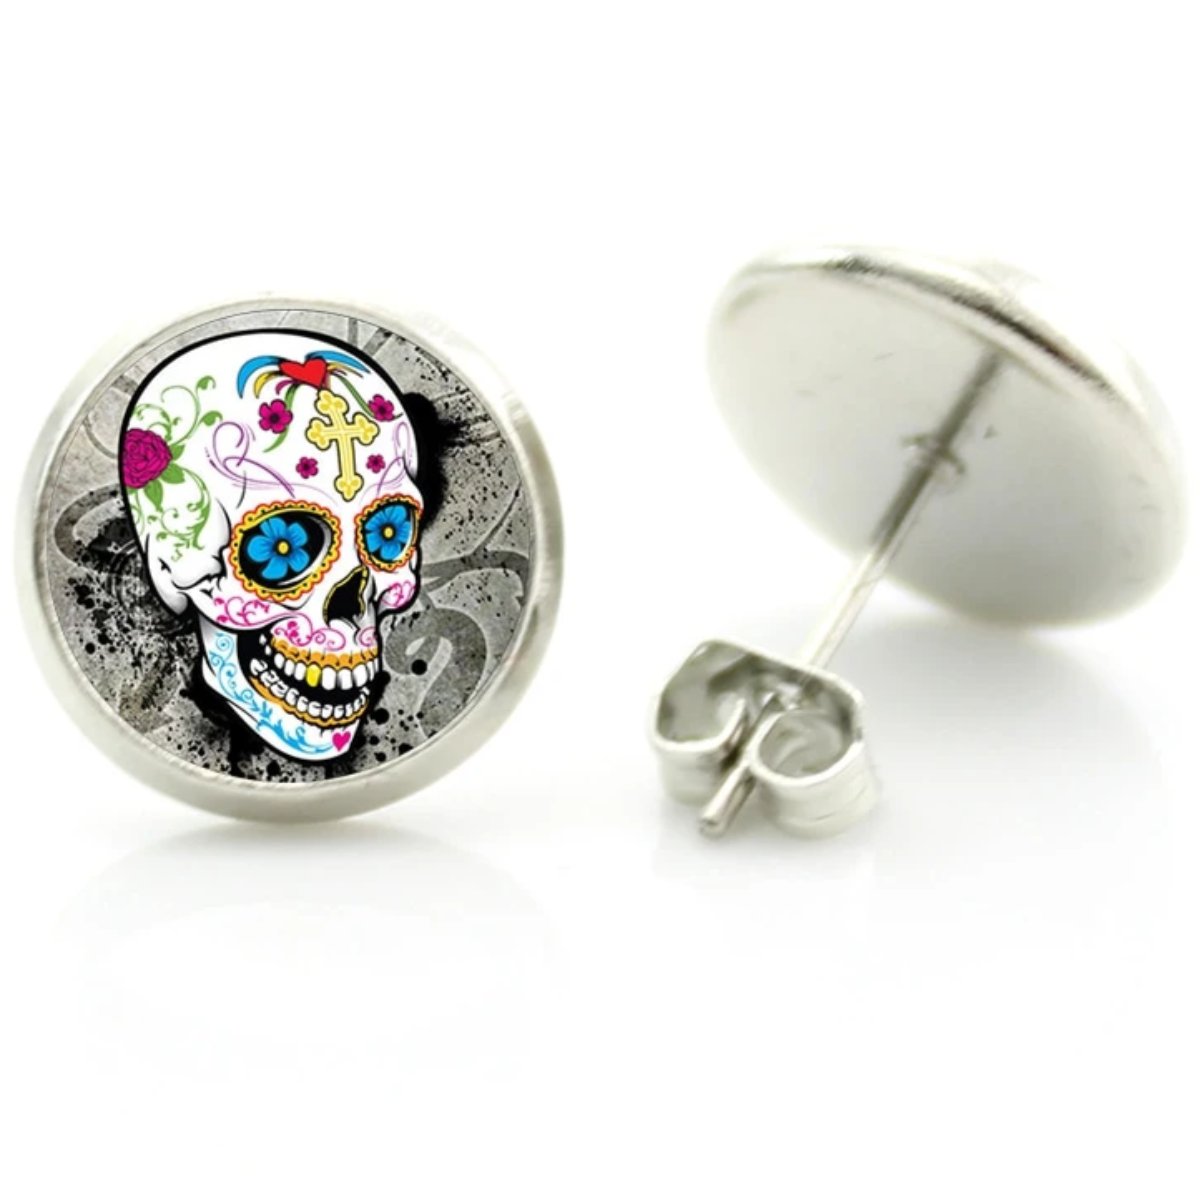 Sugar Skull Stud Earrings are a statement in jewelry.